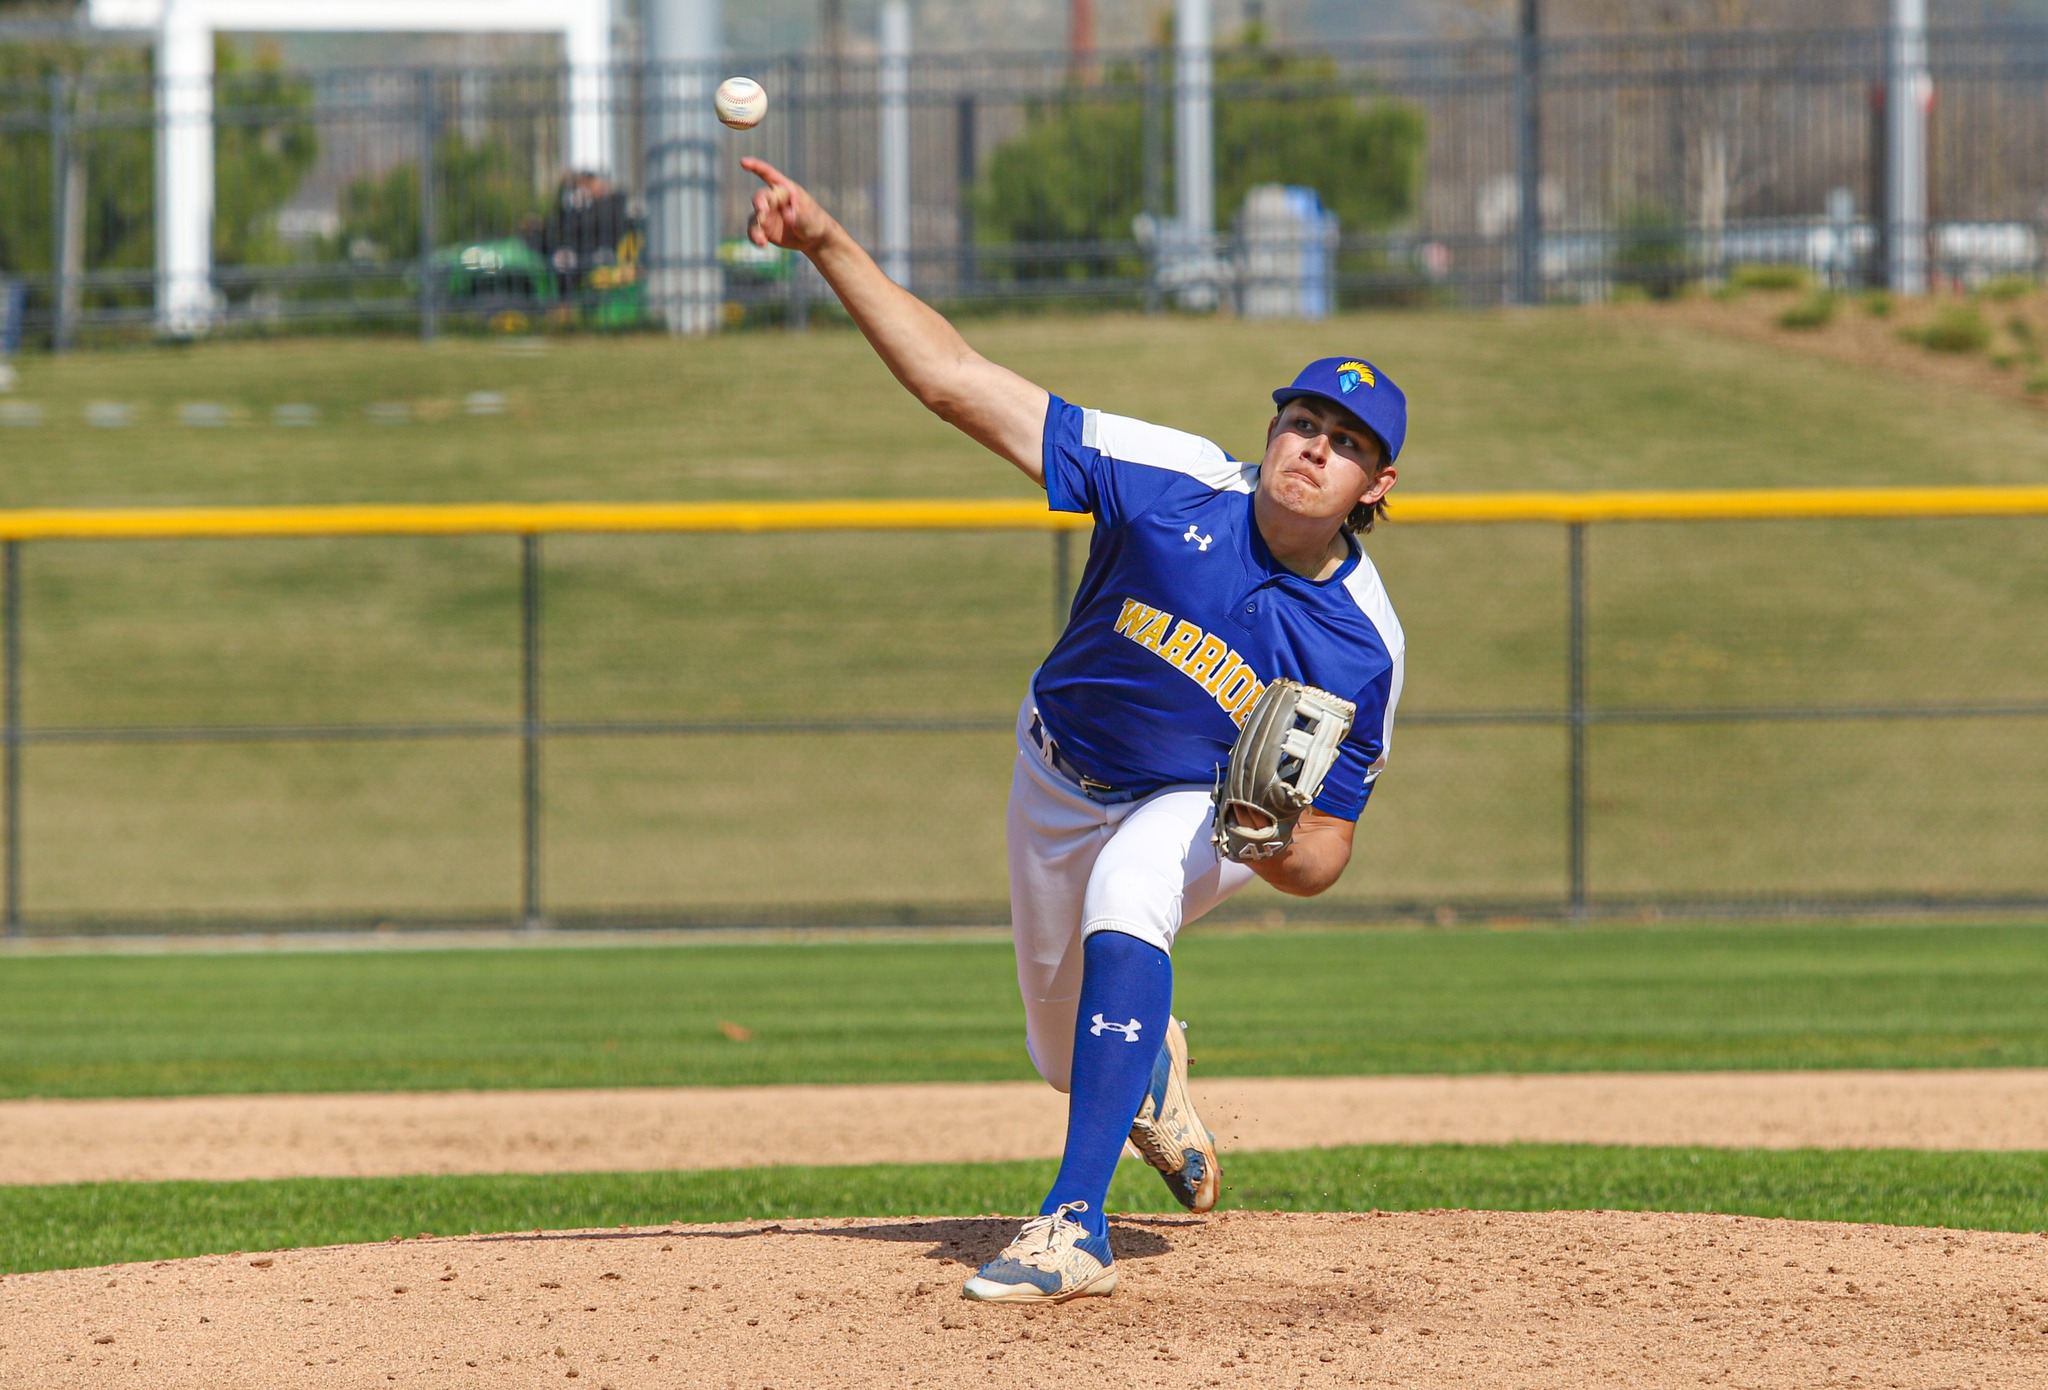 Kyle Douphner was solid in Game 2, allowing four earned on six hits, while striking out four. Photo by Adrian Wilson.